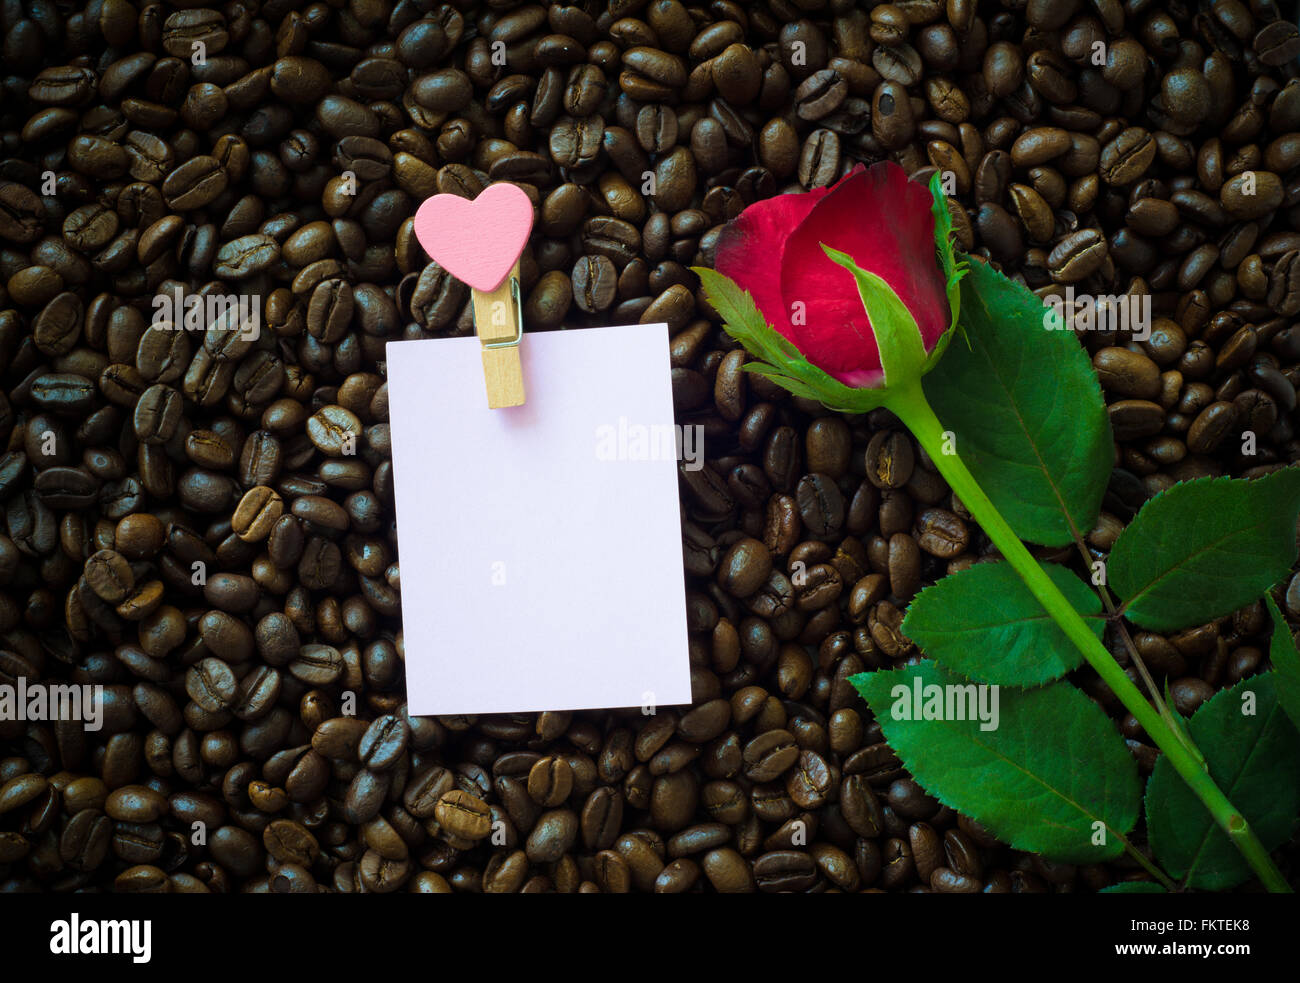 Red rose on coffee bean background Stock Photo